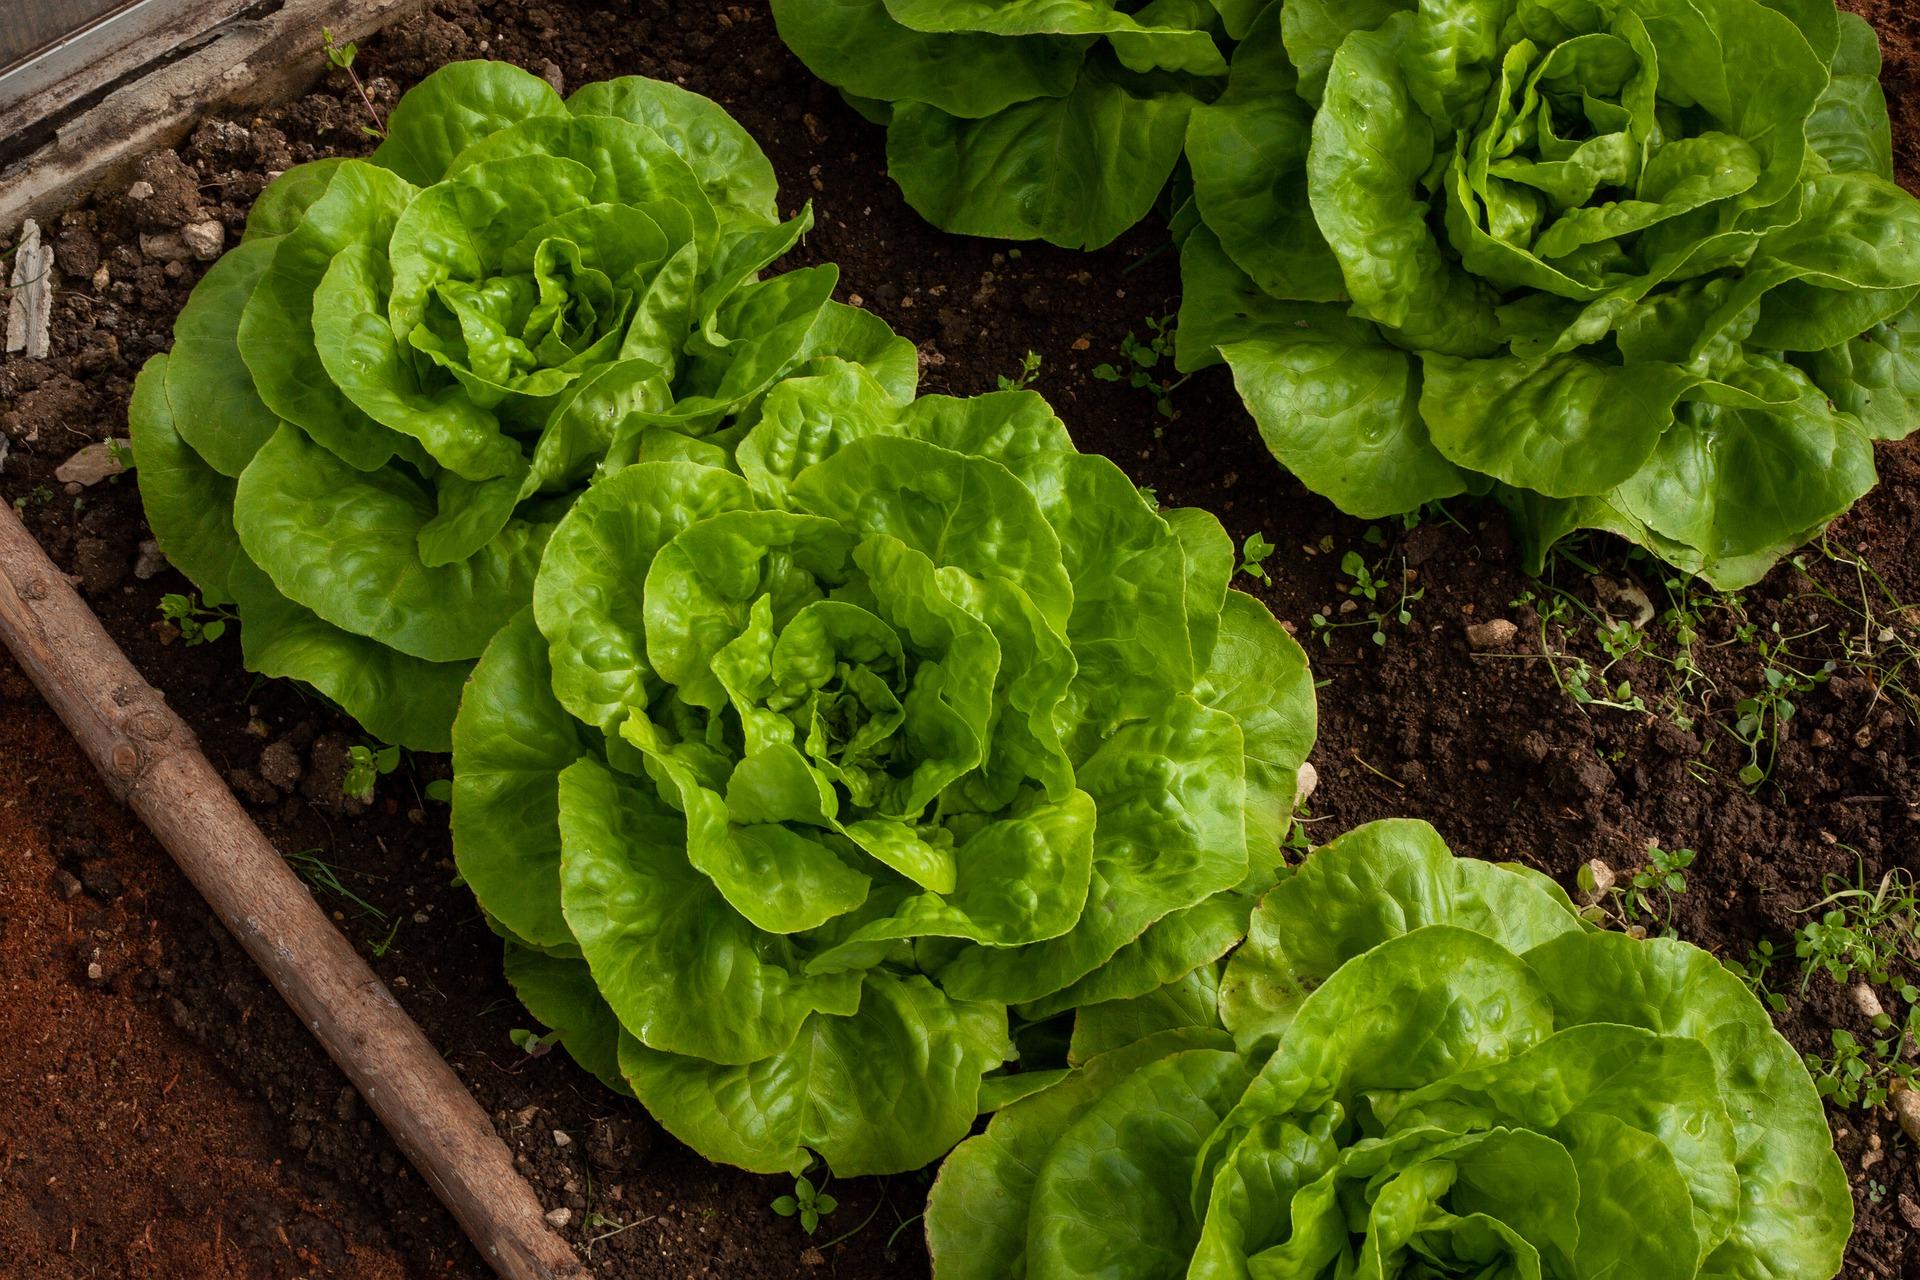 Image of Lettuce plants growing in a raised bed in the shade